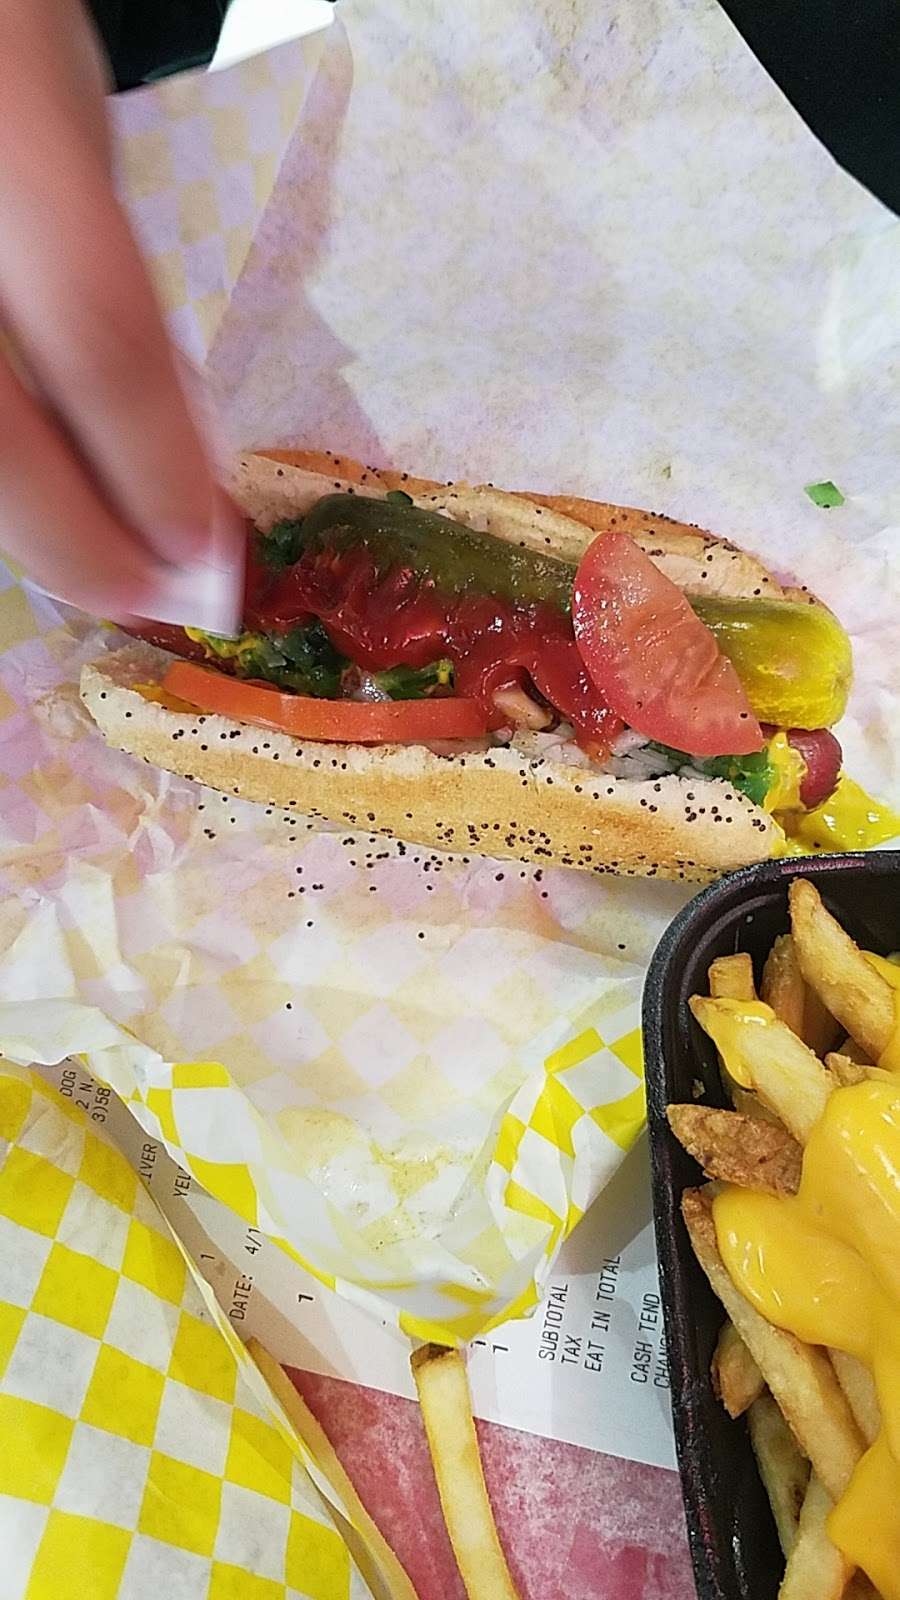 Hot Dog Station | 4742 N Kimball Ave, Chicago, IL 60625 | Phone: (773) 588-2580